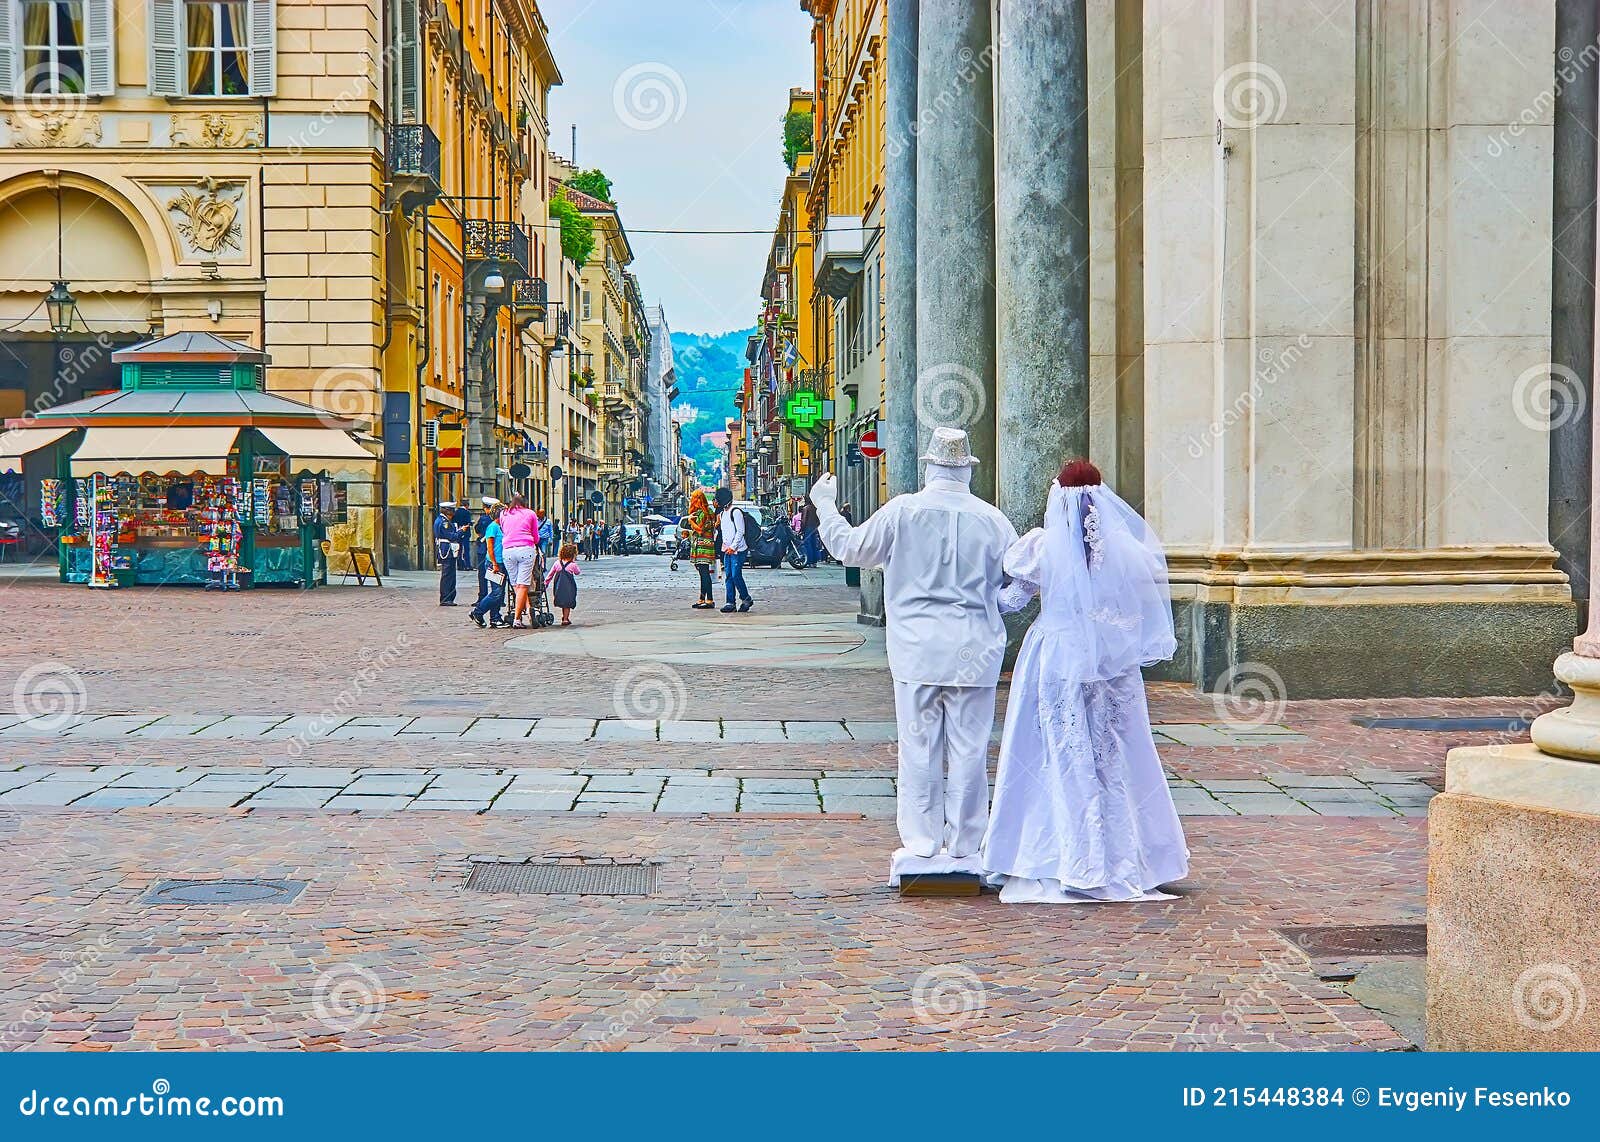 the living statue of bride and groom in piazza san carlo square, turin, italy